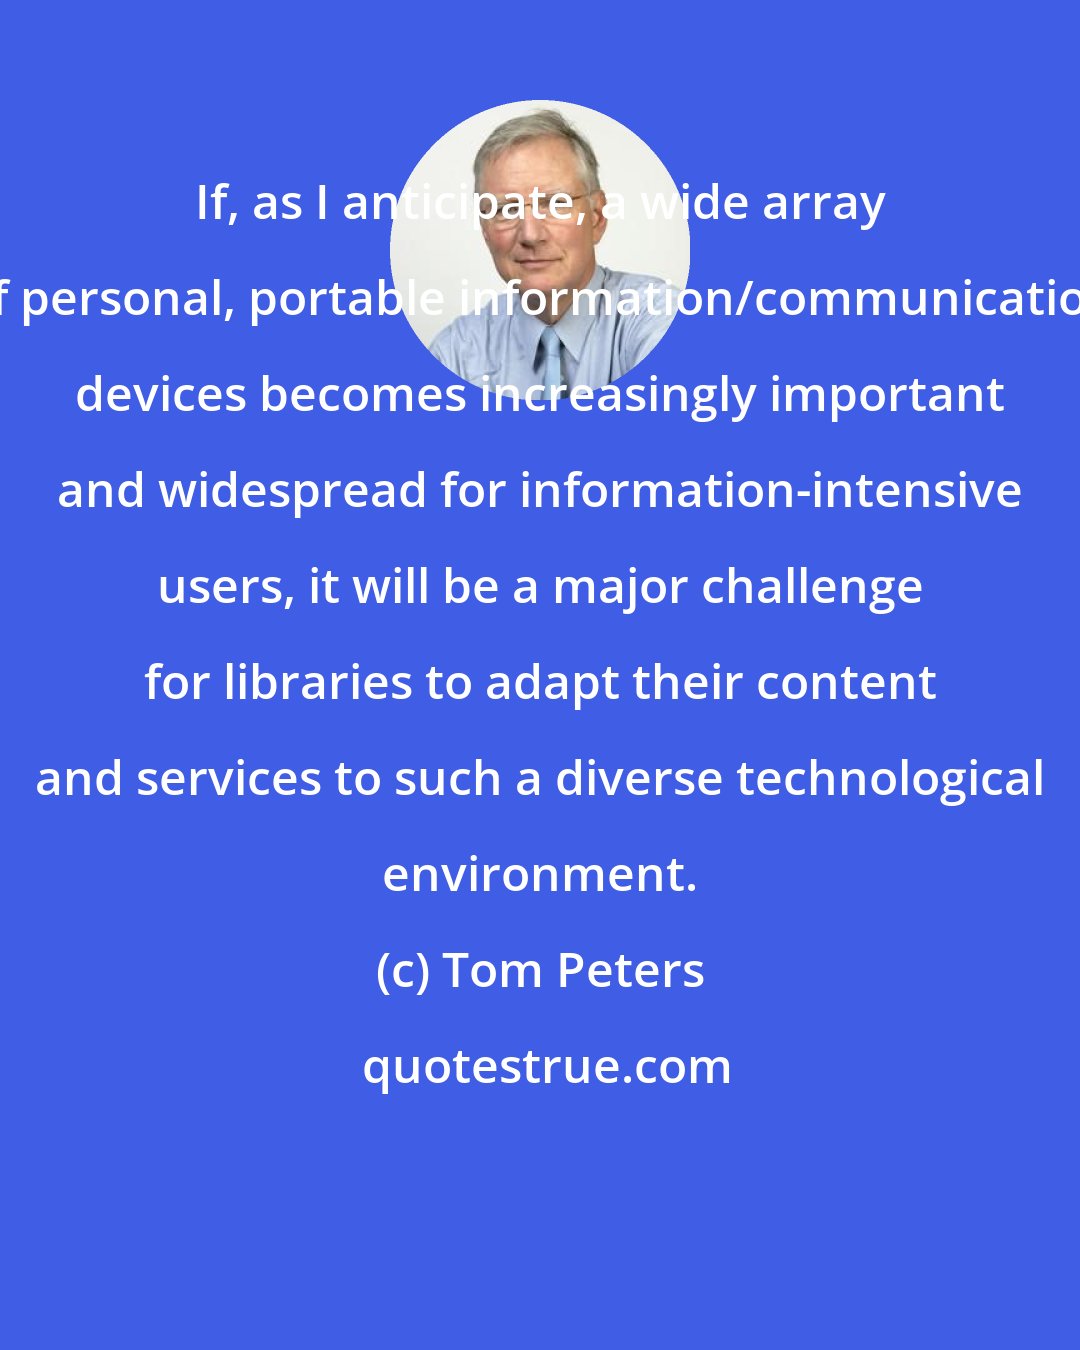 Tom Peters: If, as I anticipate, a wide array of personal, portable information/communication devices becomes increasingly important and widespread for information-intensive users, it will be a major challenge for libraries to adapt their content and services to such a diverse technological environment.